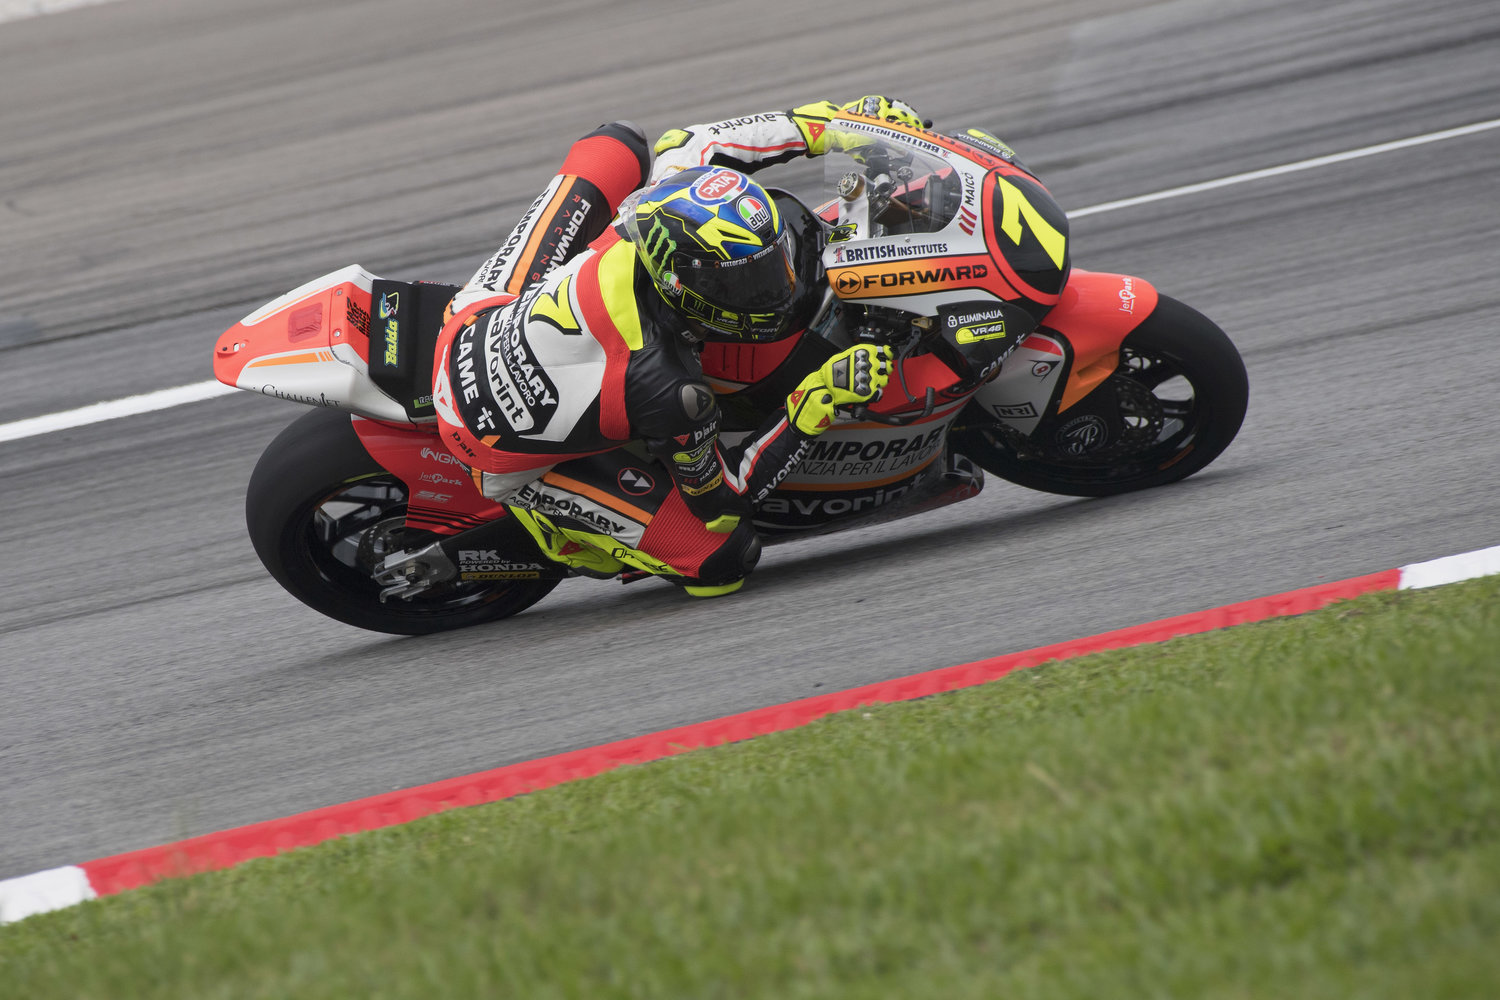 Impressive performance from Baldassarri and Marini on opening day in Sepang